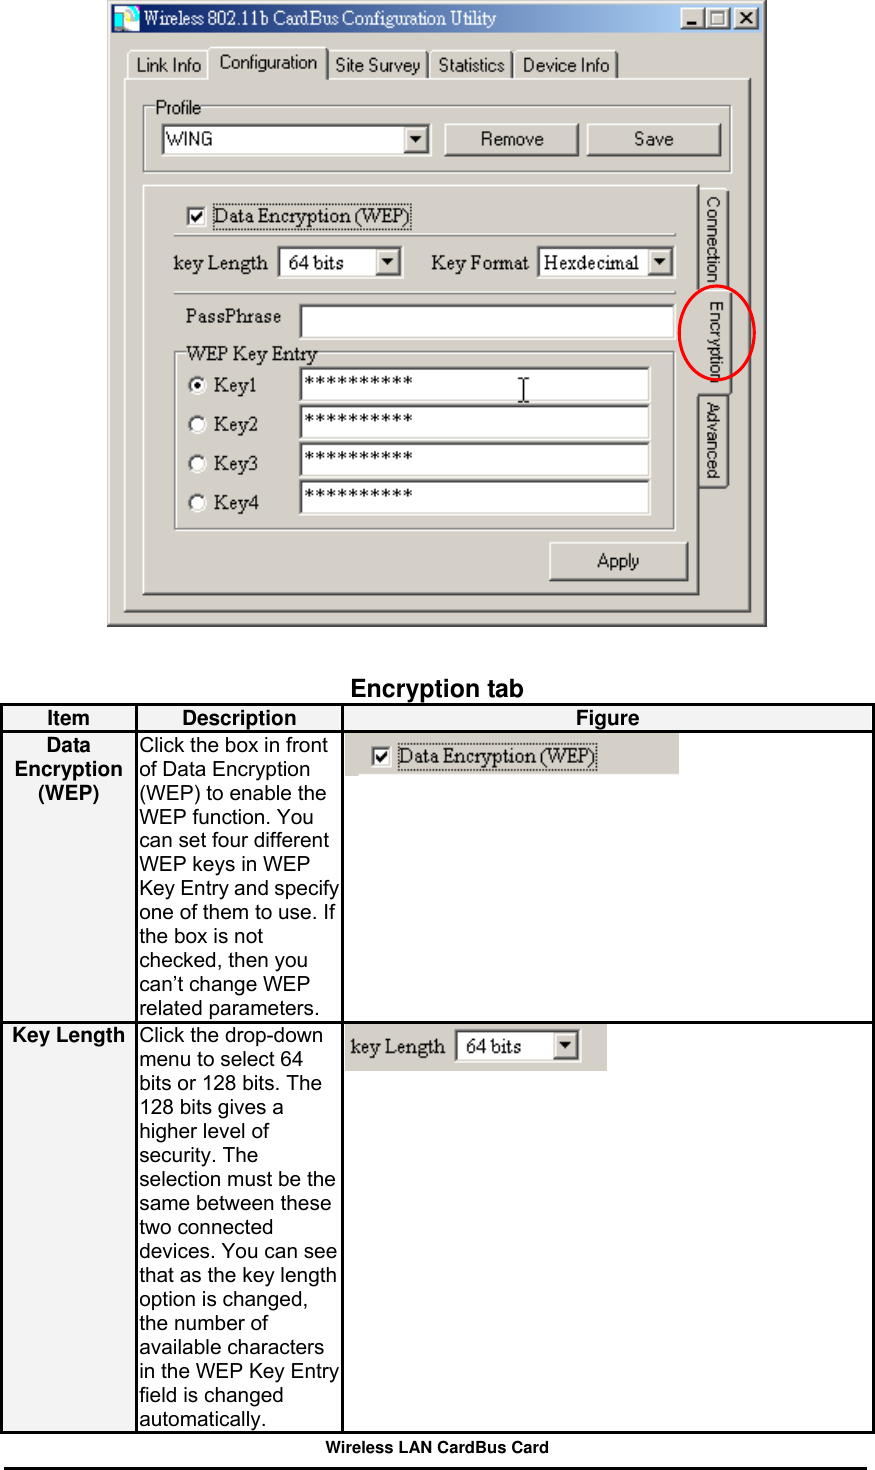    Encryption tab Item  Description  Figure Data Encryption (WEP) Click the box in front of Data Encryption (WEP) to enable the WEP function. You can set four different WEP keys in WEP Key Entry and specify one of them to use. If the box is not checked, then you can’t change WEP related parameters.  Key Length  Click the drop-down menu to select 64 bits or 128 bits. The 128 bits gives a higher level of security. The selection must be the same between these two connected devices. You can see that as the key lengthoption is changed, the number of available characters in the WEP Key Entry field is changed automatically.   Wireless LAN CardBus Card 